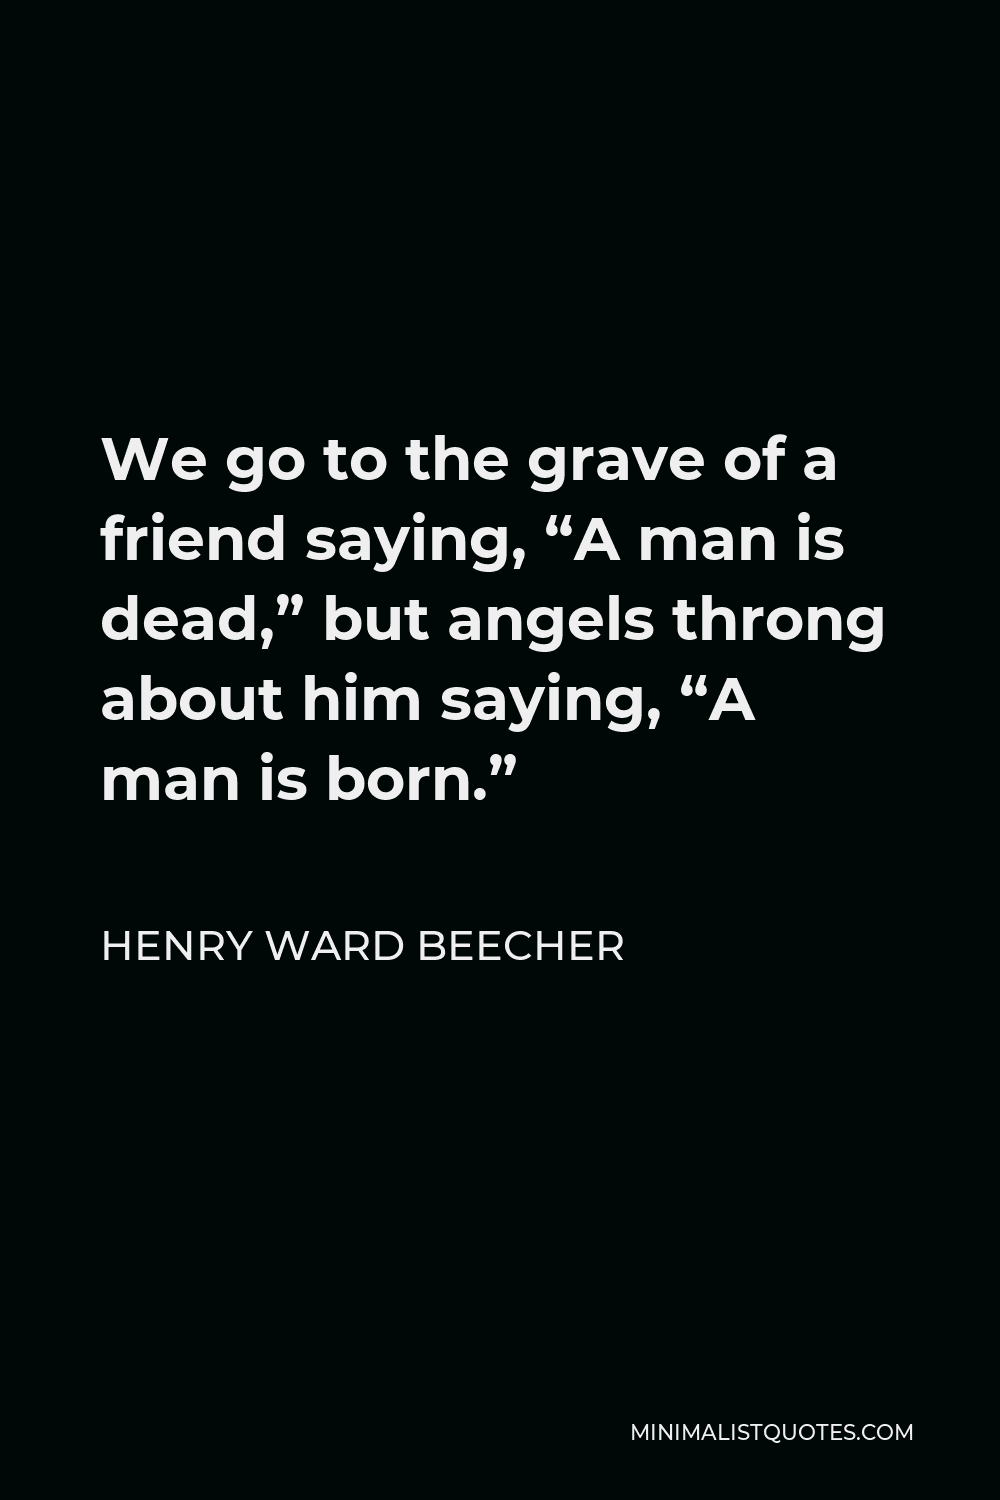 Henry Ward Beecher Quote - We go to the grave of a friend saying, “A man is dead,” but angels throng about him saying, “A man is born.”